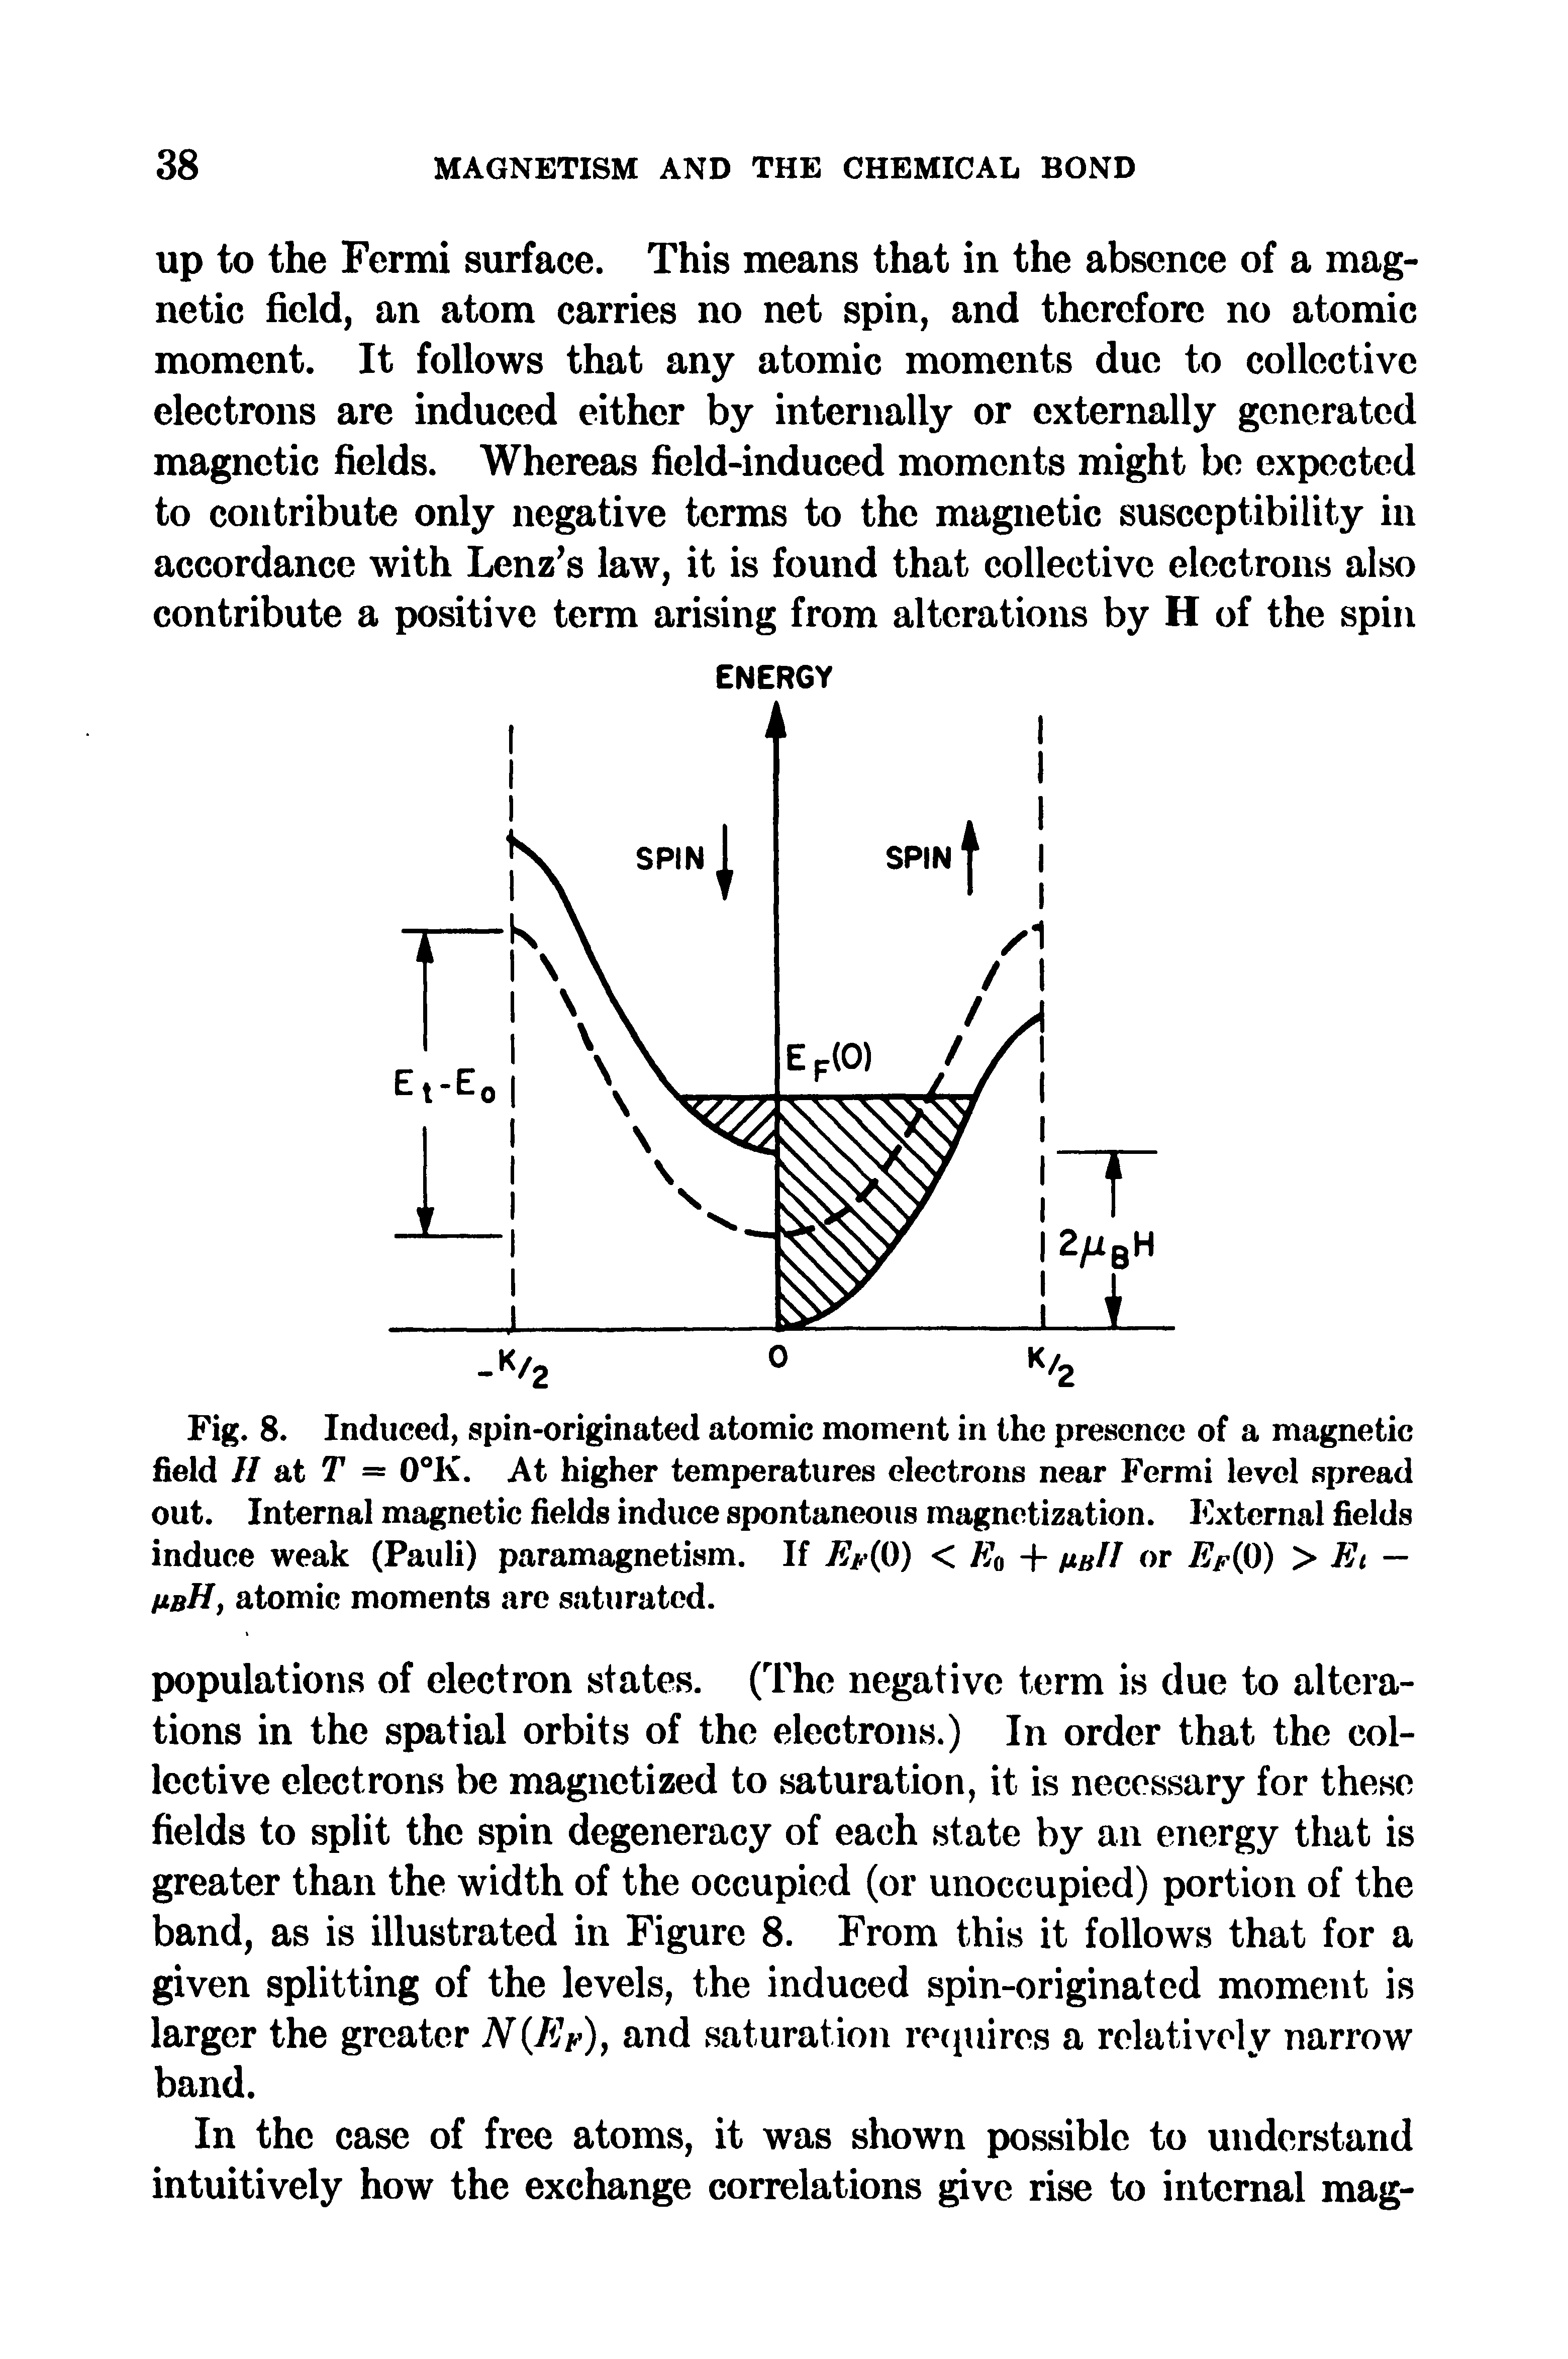 Fig. 8. Induced, spin-originated atomic moment in the presence of a magnetic field // at T = 0°K. At higher temperatures electrons near Fermi level spread out. Internal magnetic fields induce spontaneous magnetization. External fields induce weak (Pauli) paramagnetism. If Ef(0) < EQ null or Ef(P) > Et — hbH, atomic moments are saturated.